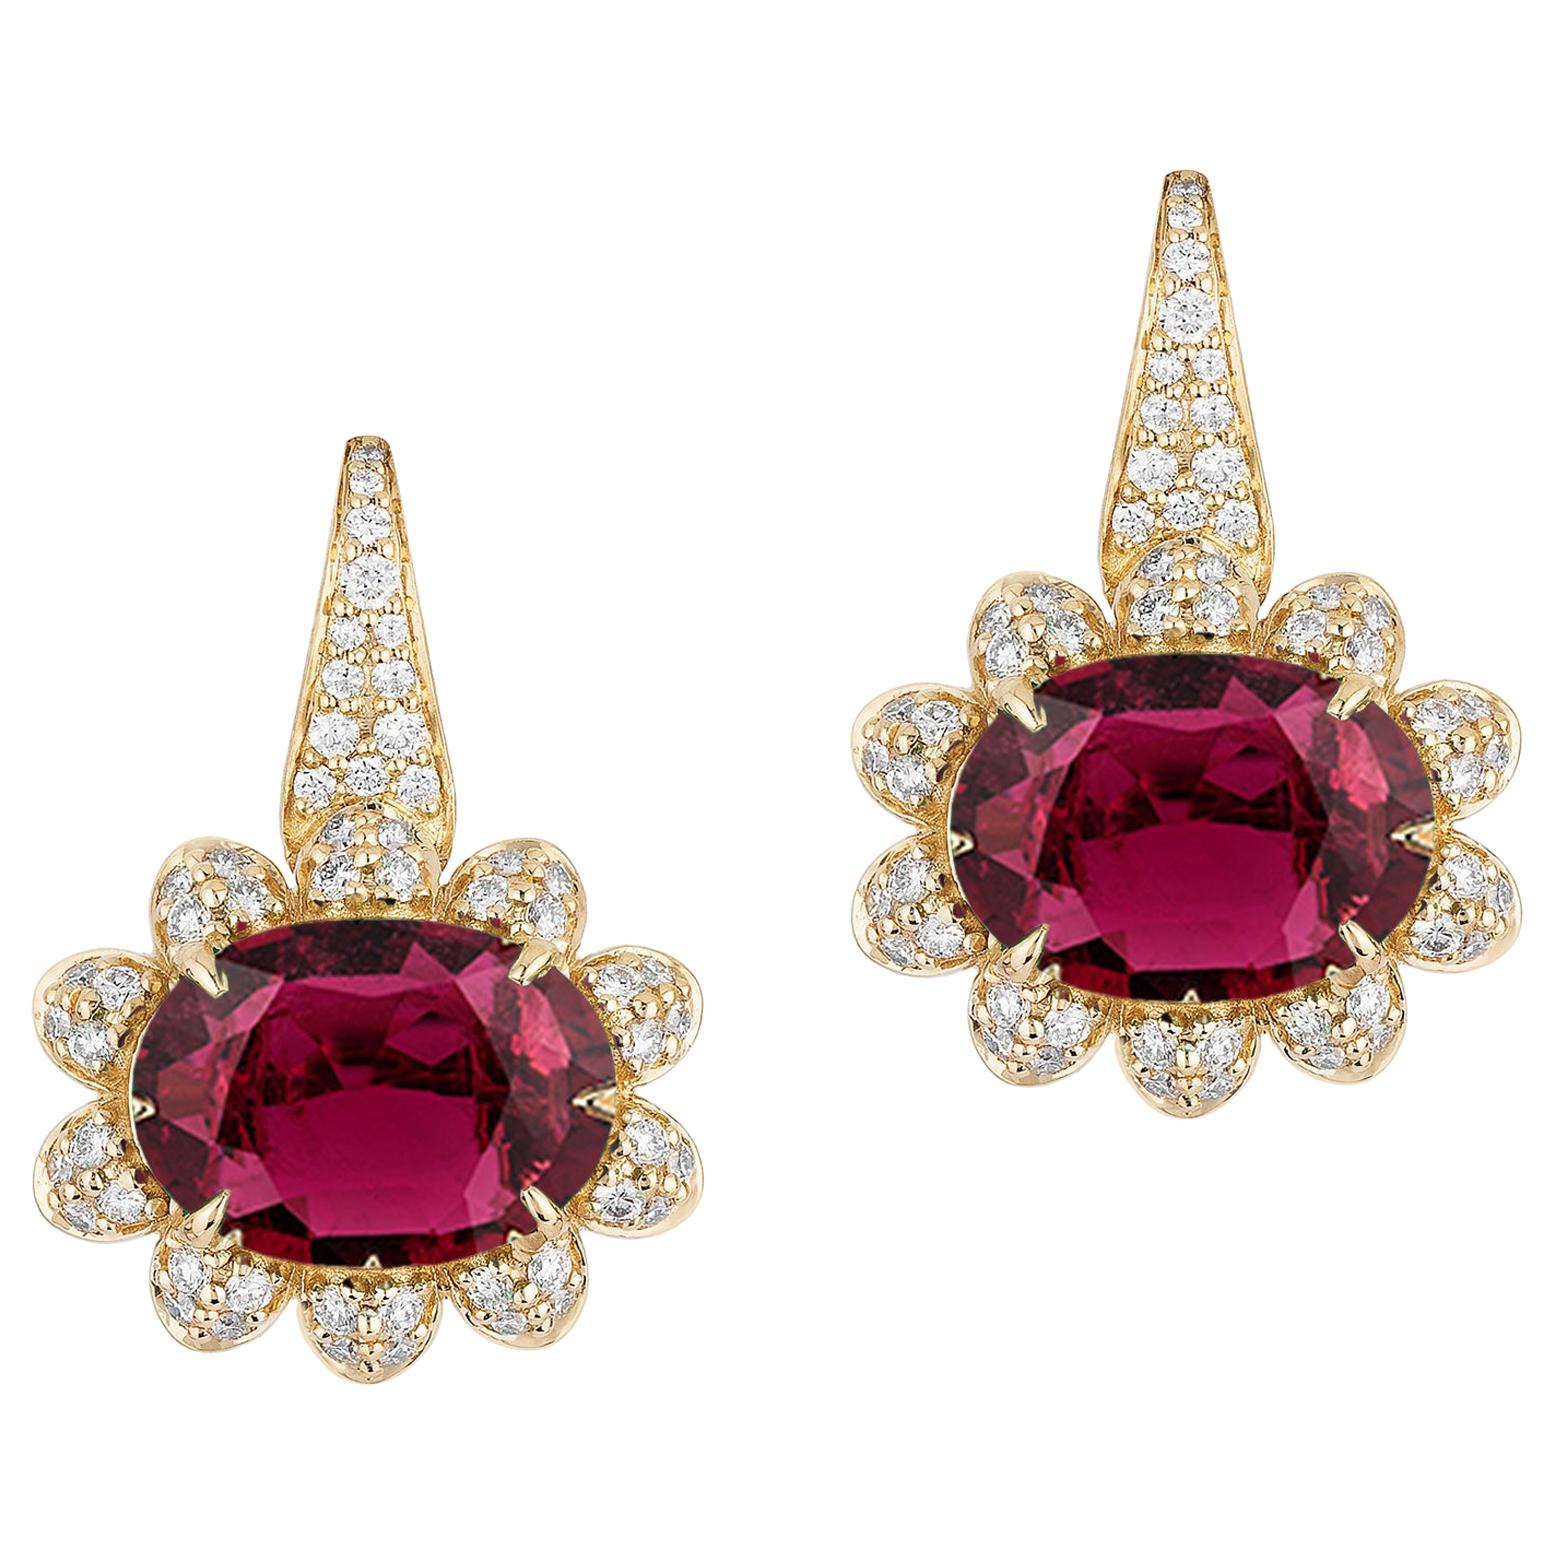 Goshwara Faceted Oval Rubellite with Diamonds Earrings